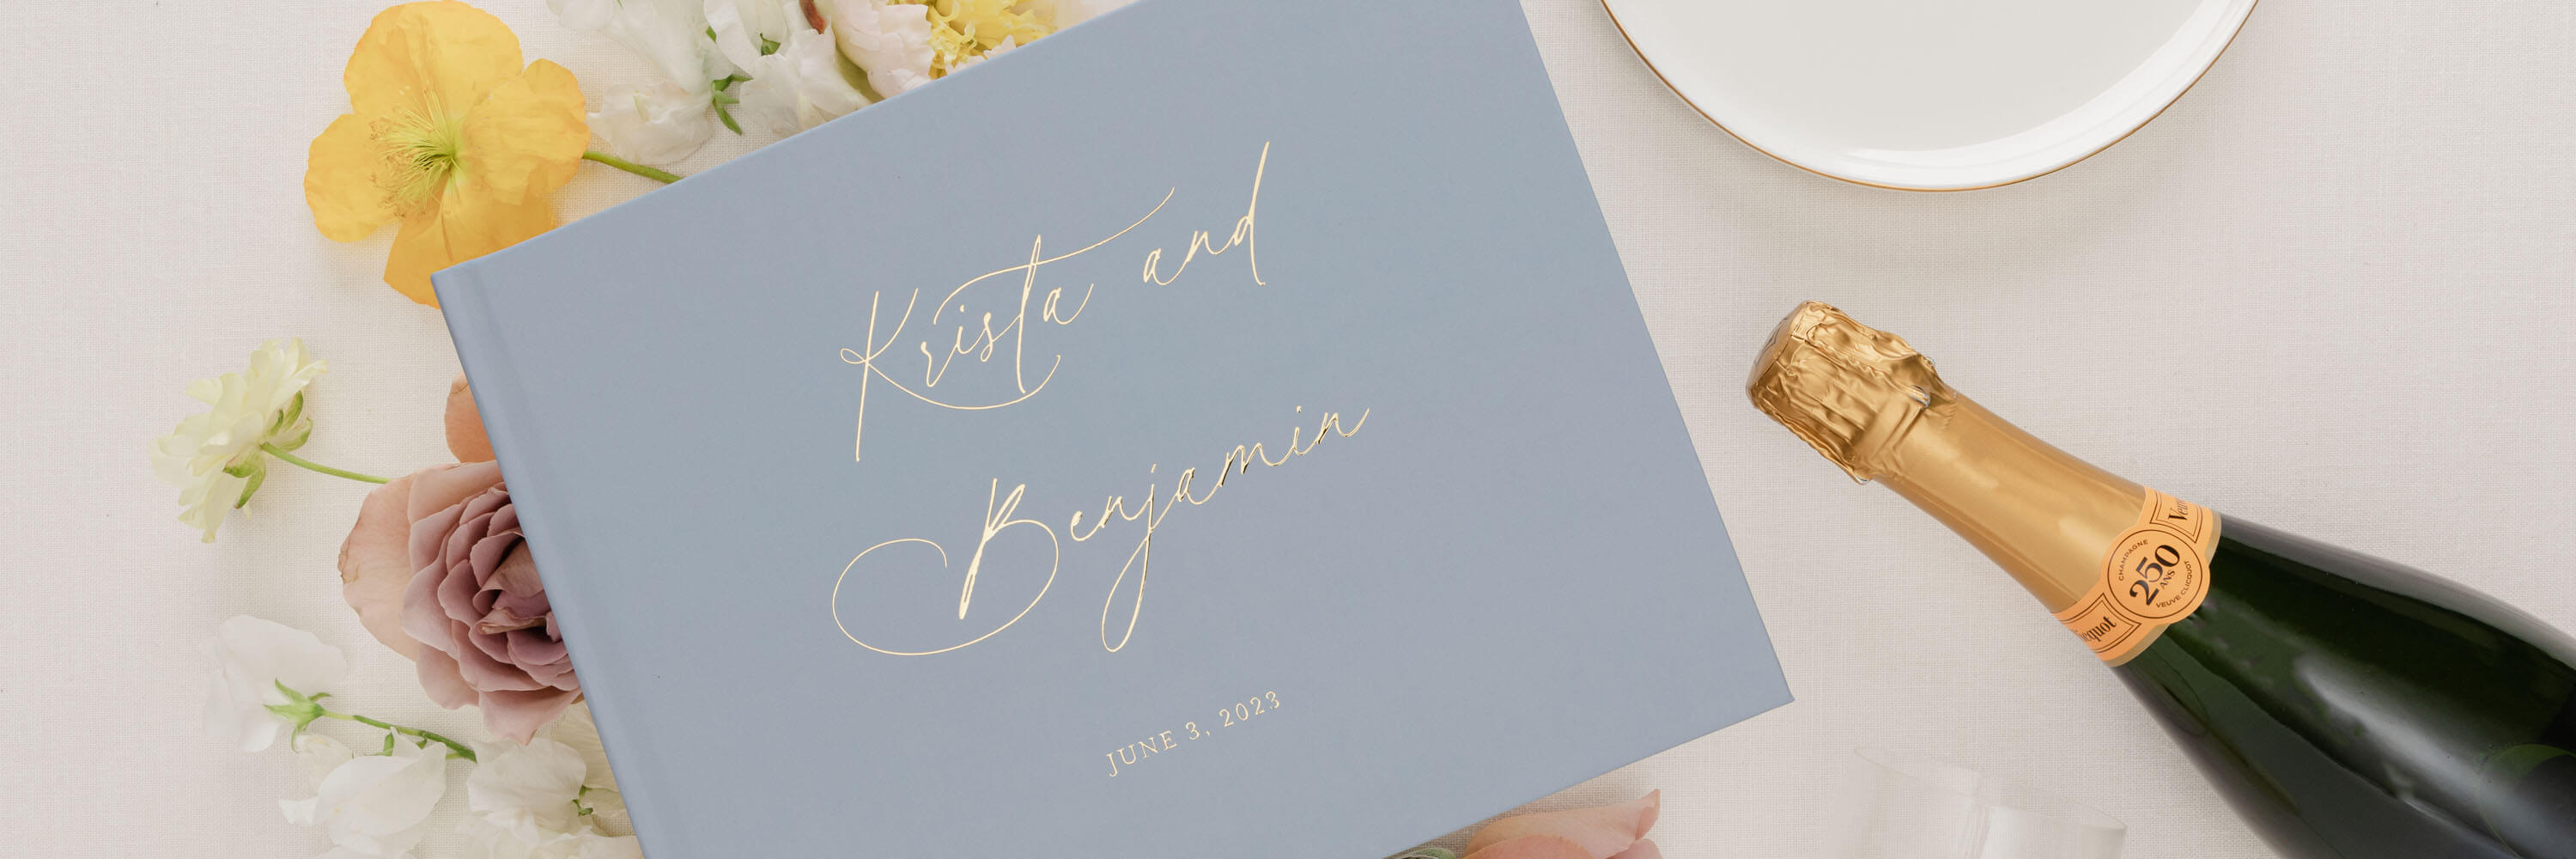 Personalized Wedding Guest Books Lily Roe Co.